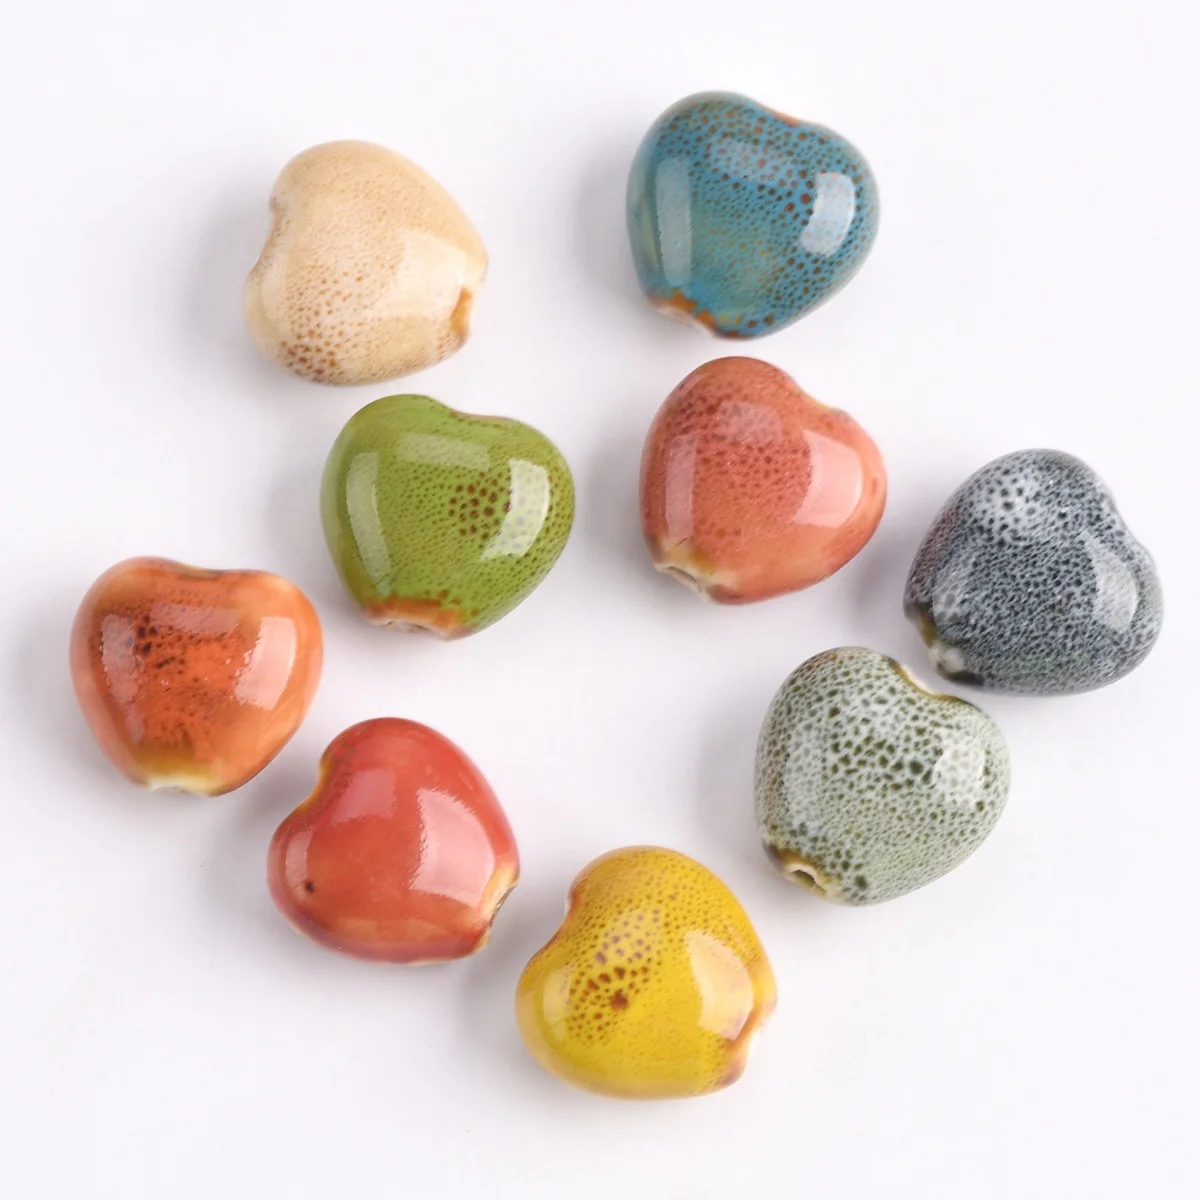 10pcs Fat Heart 16x15mm Handmade Fancy Glaze Ceramic Porcelain Loose Spacer Beads Lot For Jewelry Making DIY Findings 10pcs colorful rotary control vintage plastic white knob 16x15mm for guitar 6 35mm shaft amp parts